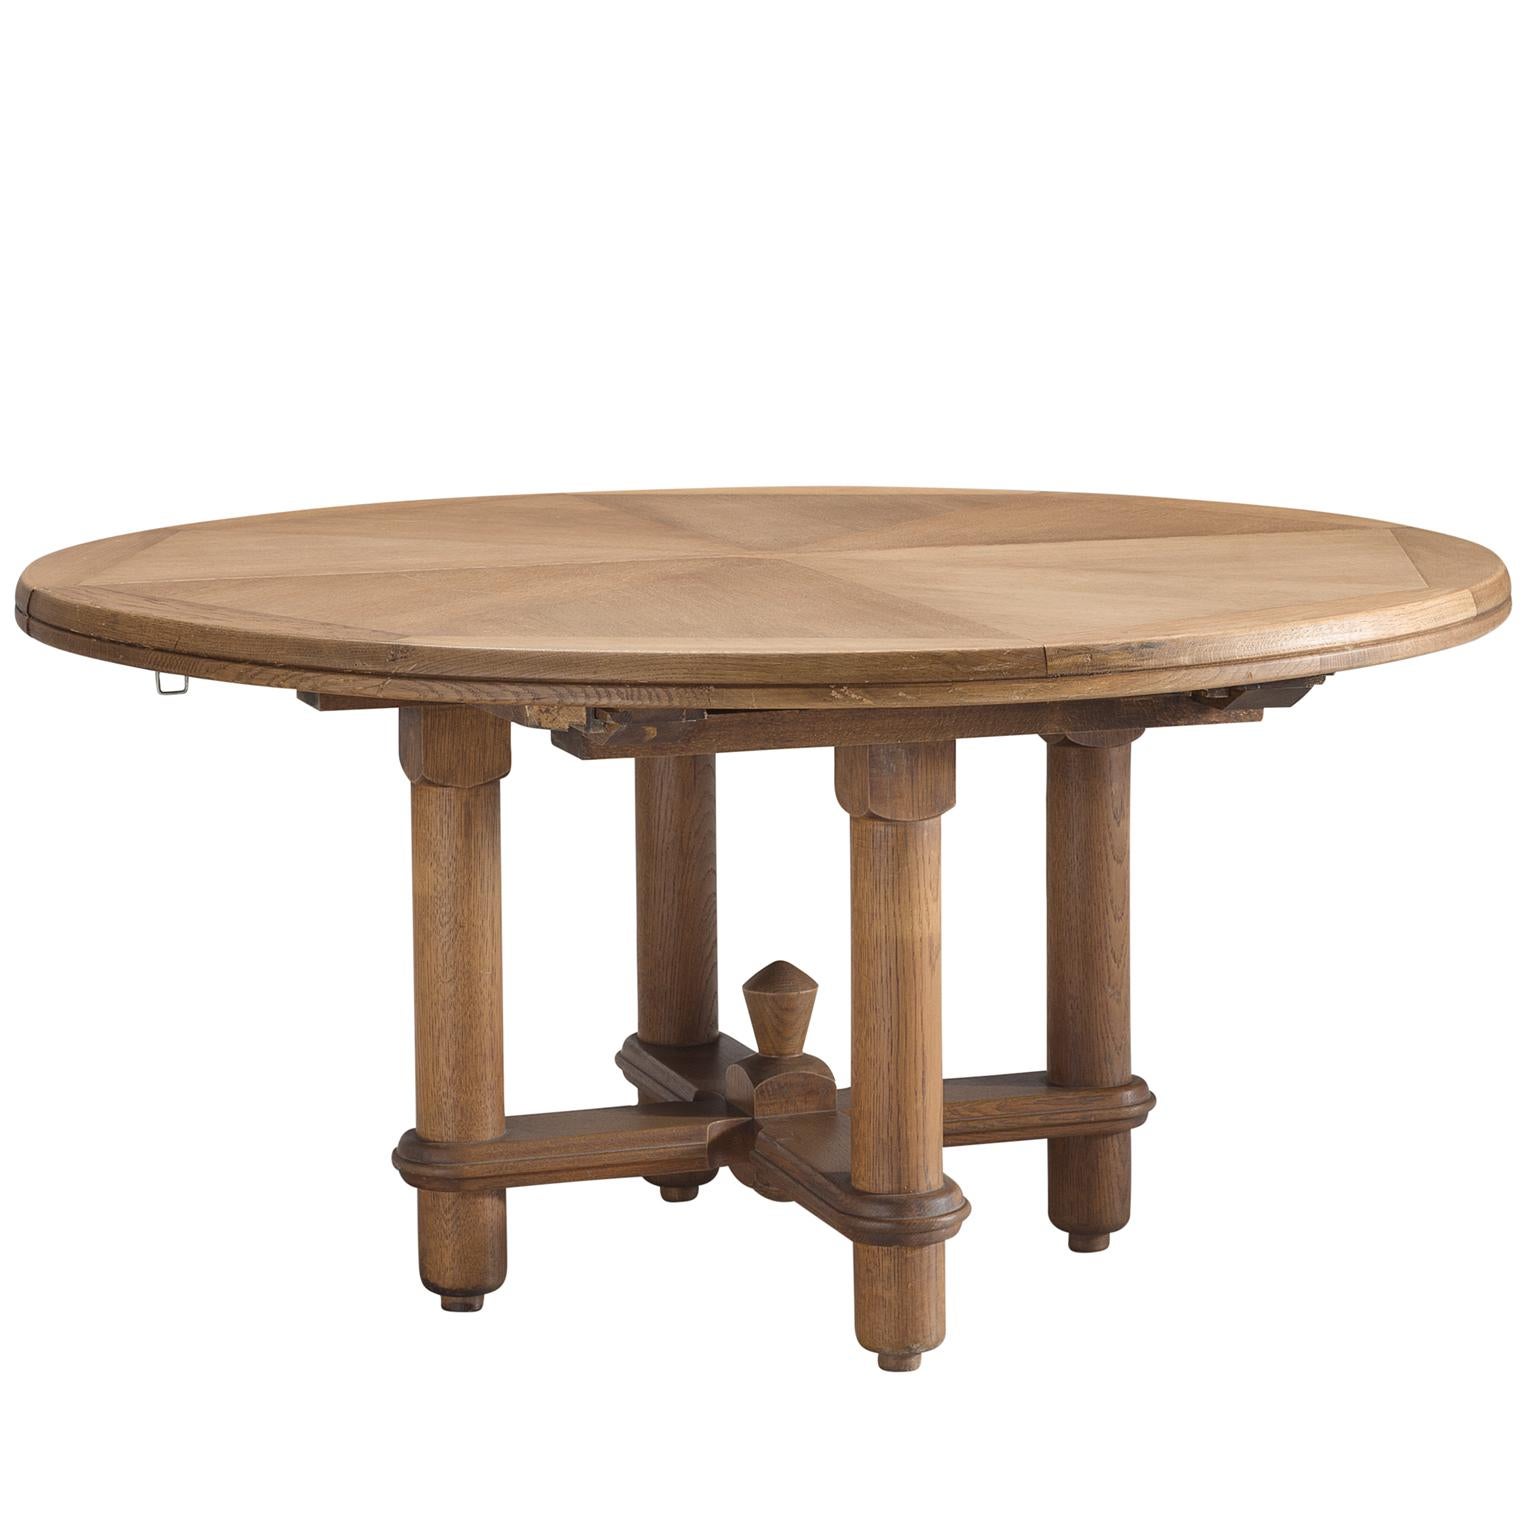 Guillerme et Chambron Round Dining Table in Oak